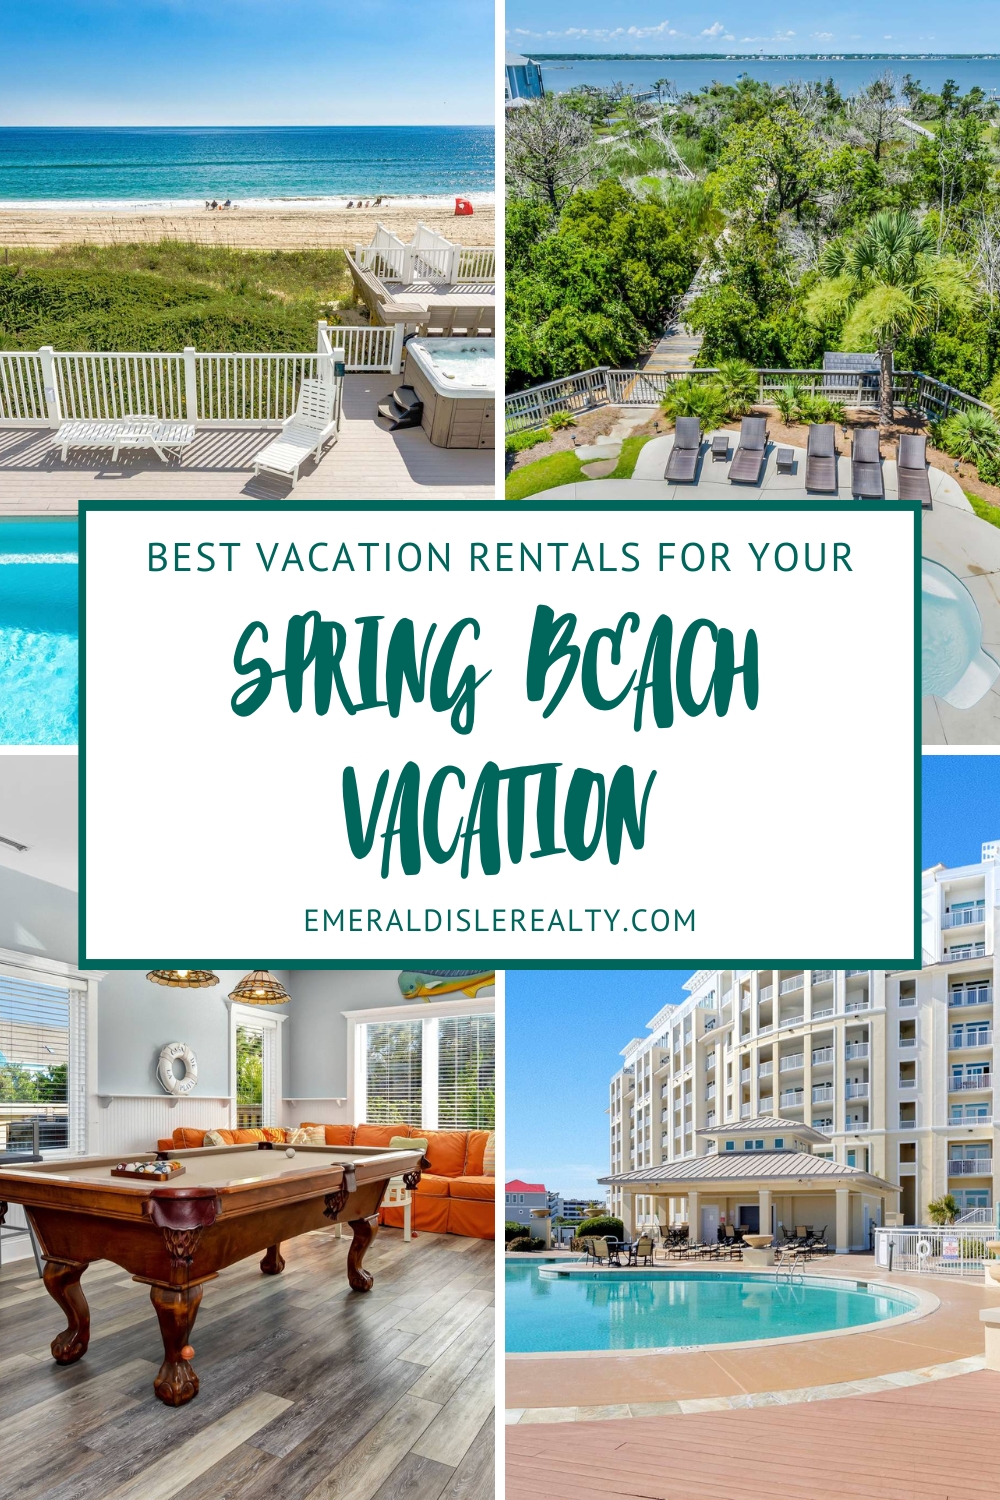 Best Crystal Coast Vacation Rentals for Your Spring Beach Vacation